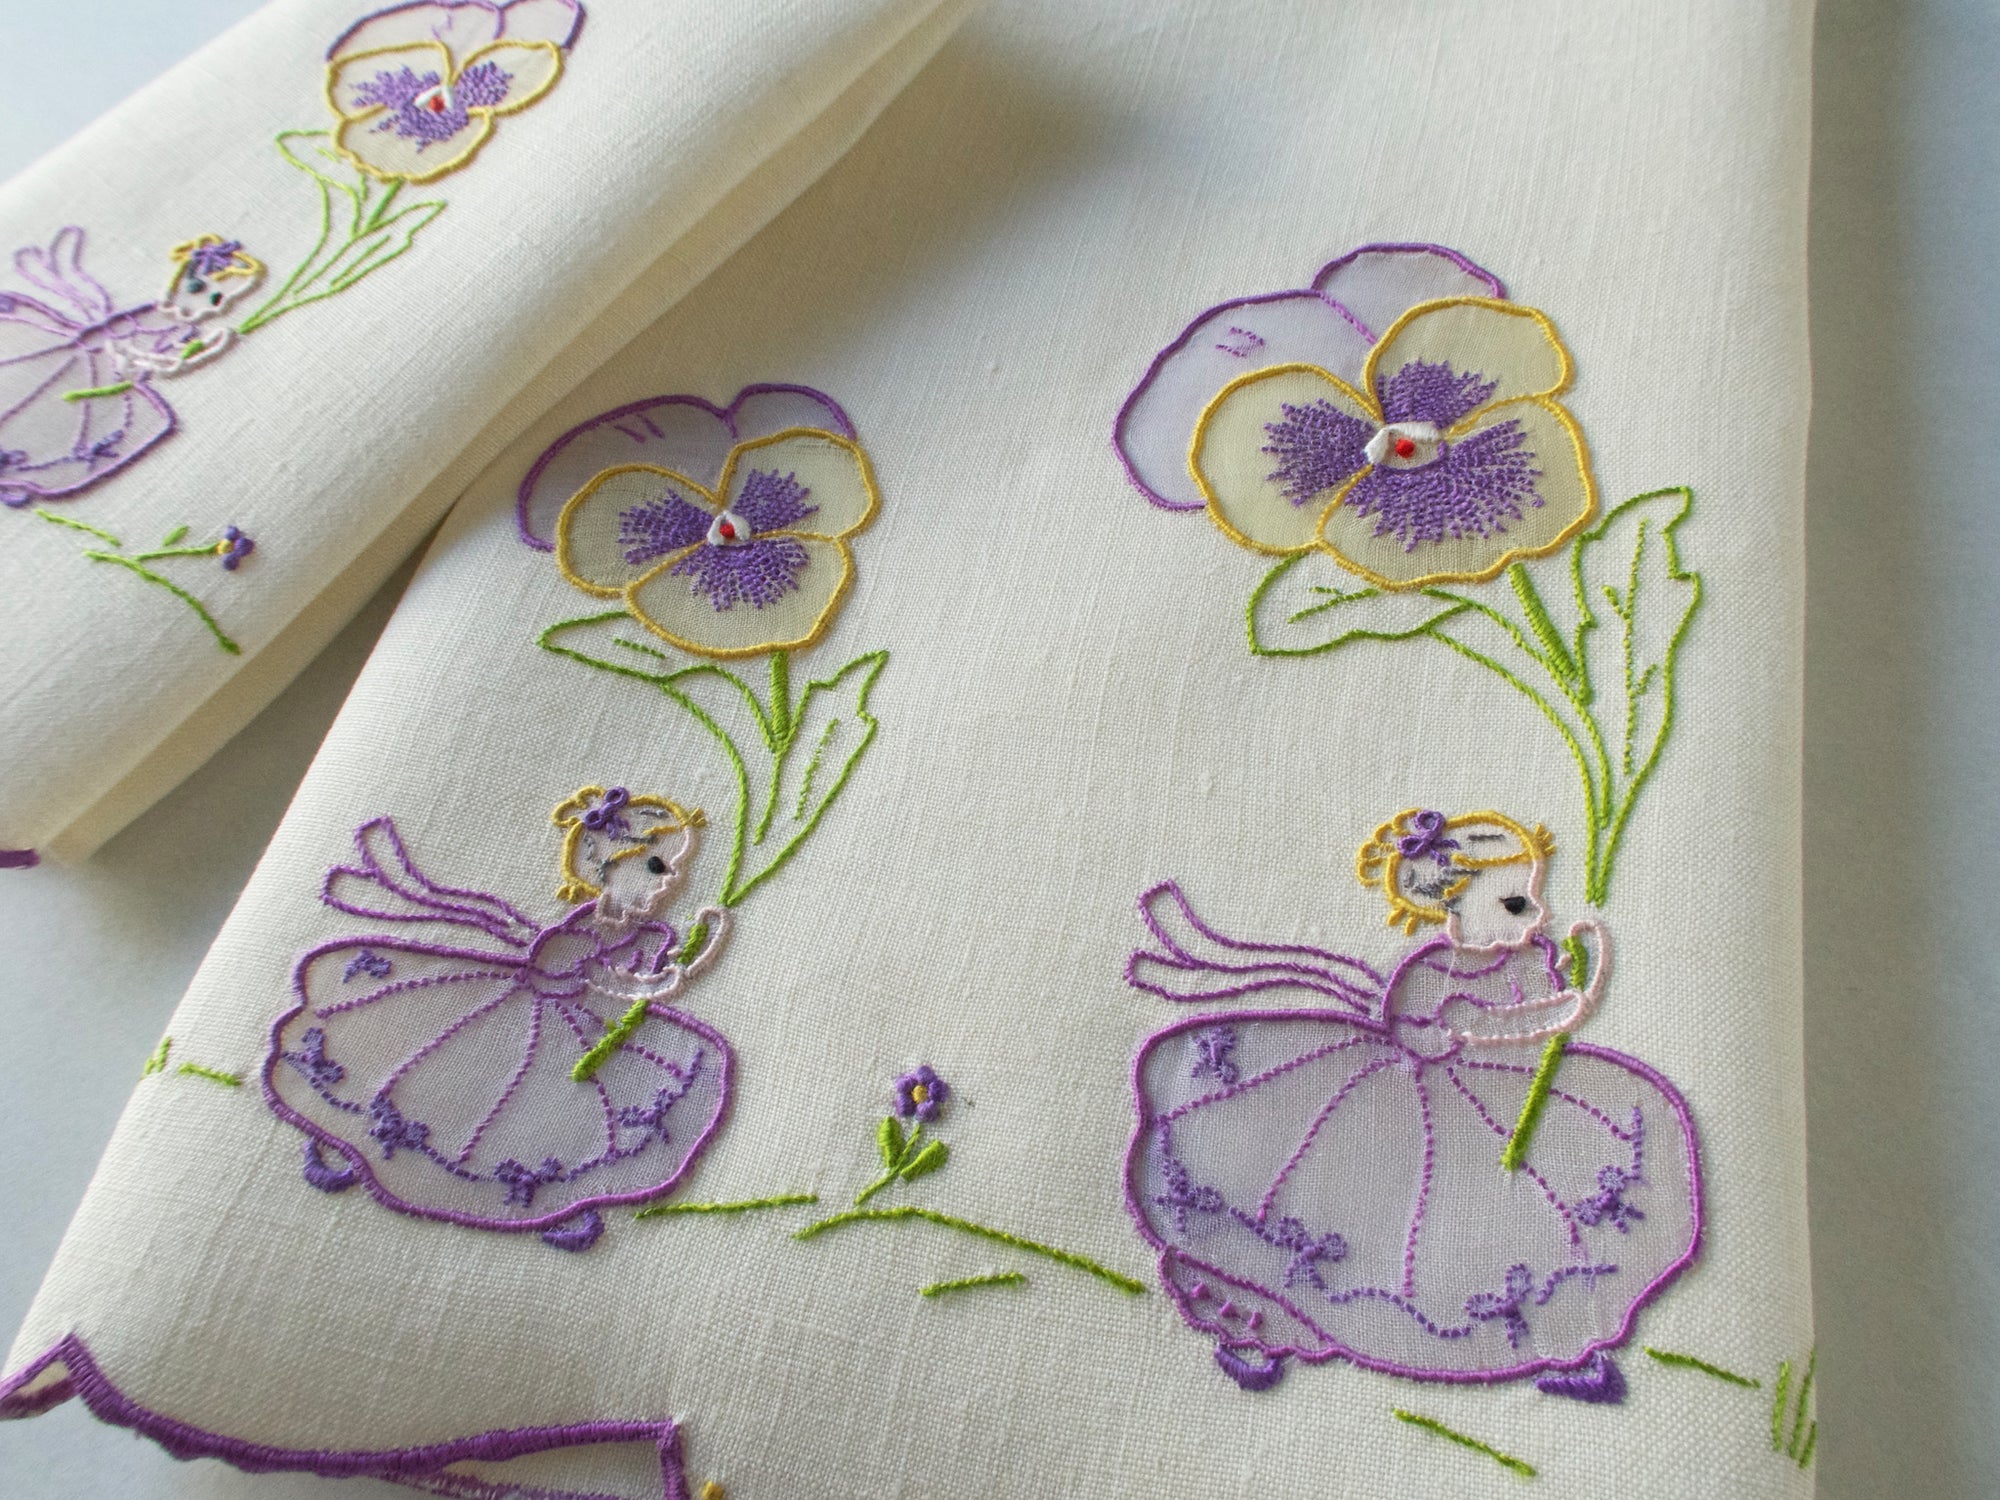 Pansy Parade Vintage Madeira Guest Towels, Set of 2